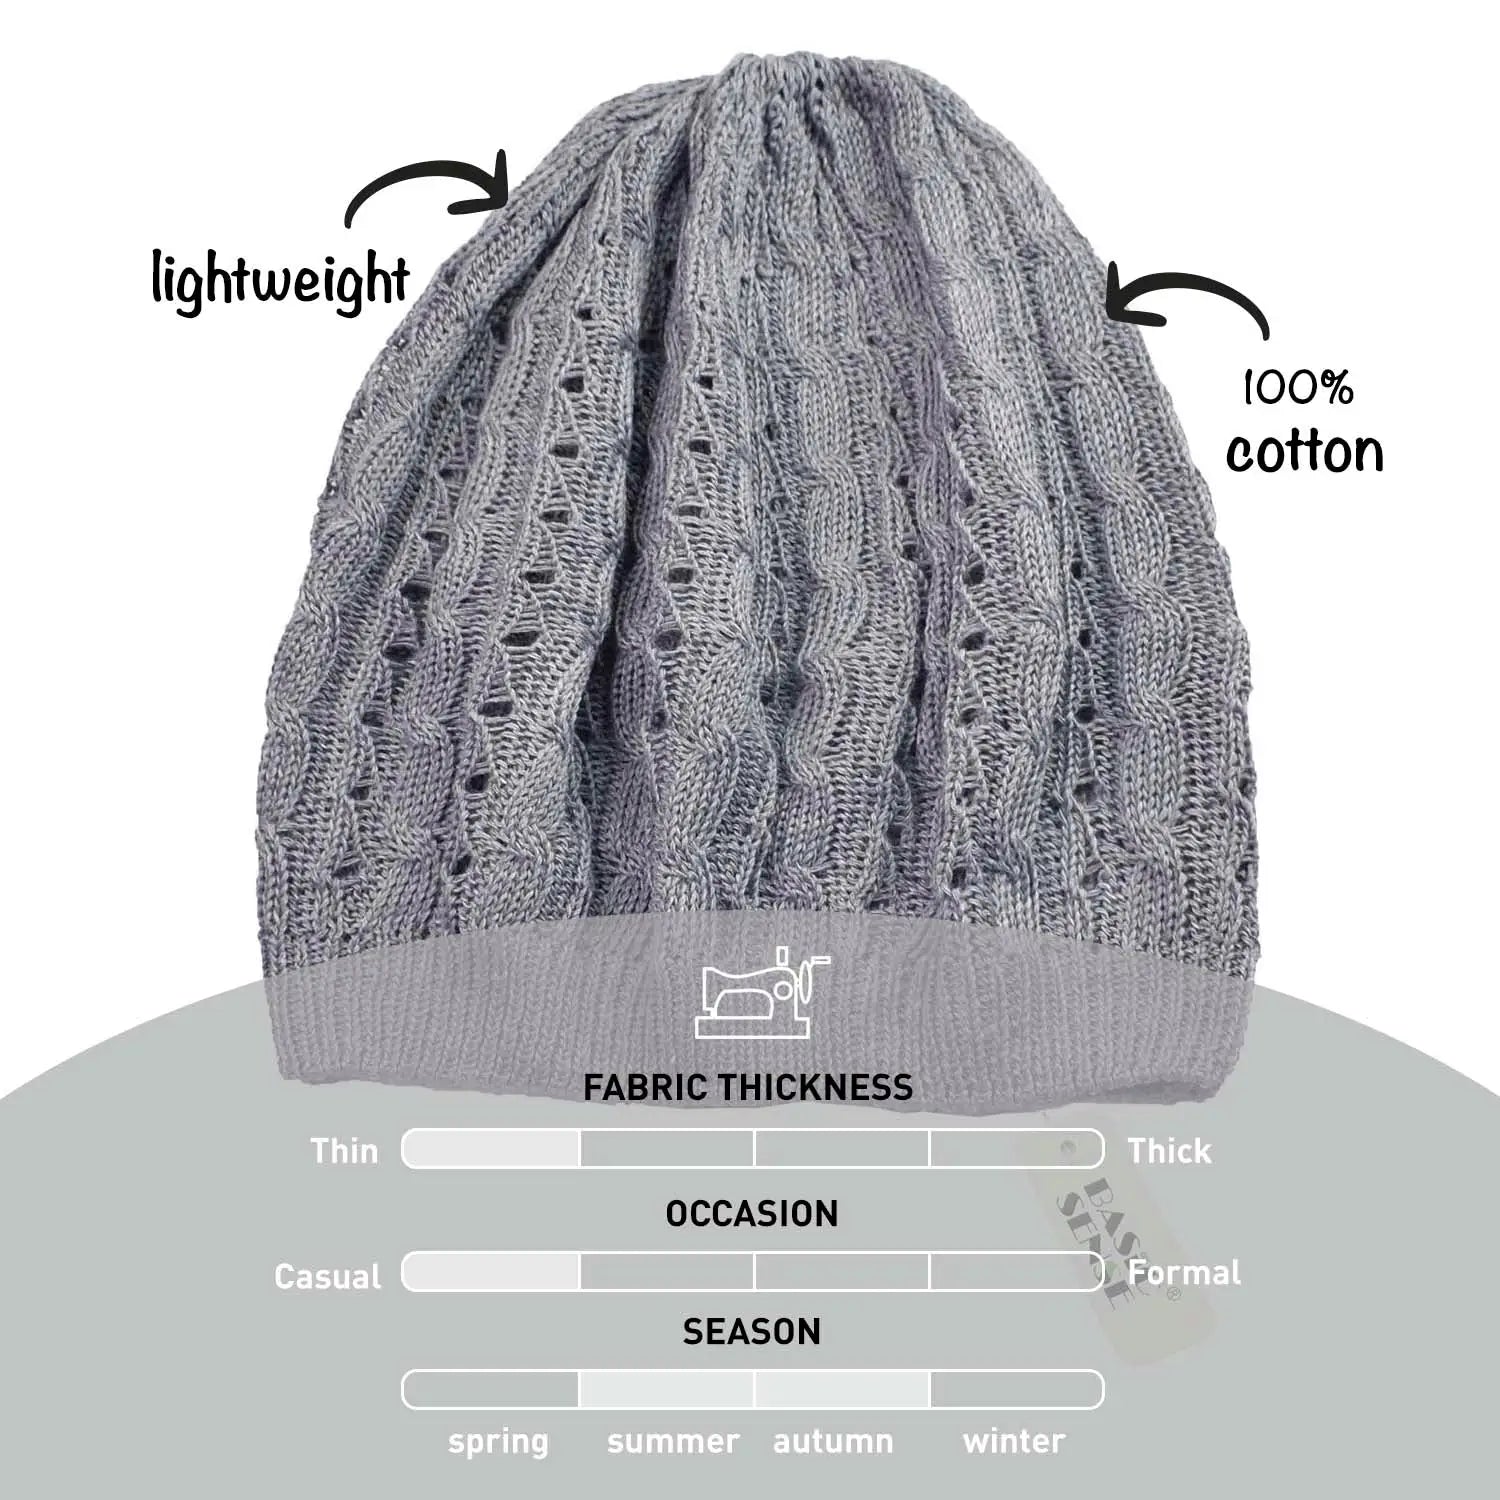 Women’s Triangle Design Knitted Crochet Beanie Hat - Gray hat with ’light weight’ on white background